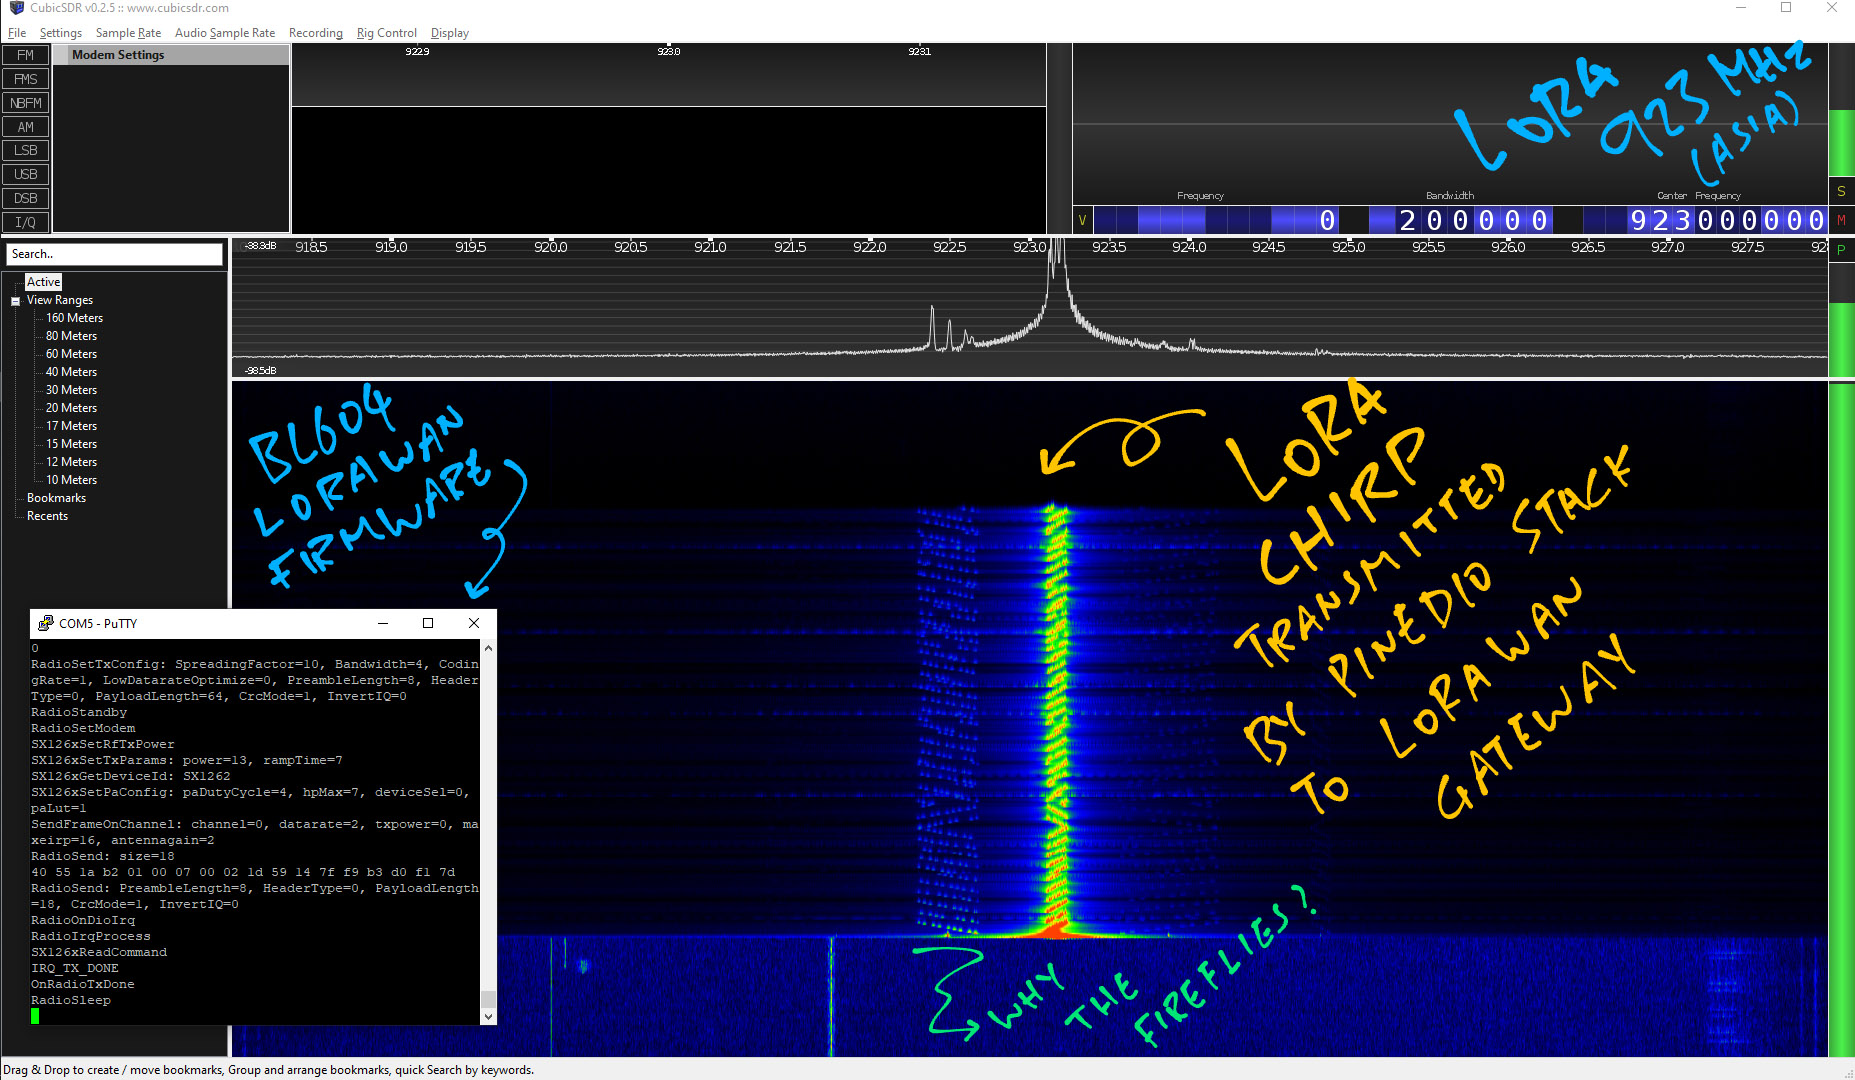 LoRa SX1262 visualised with SDR